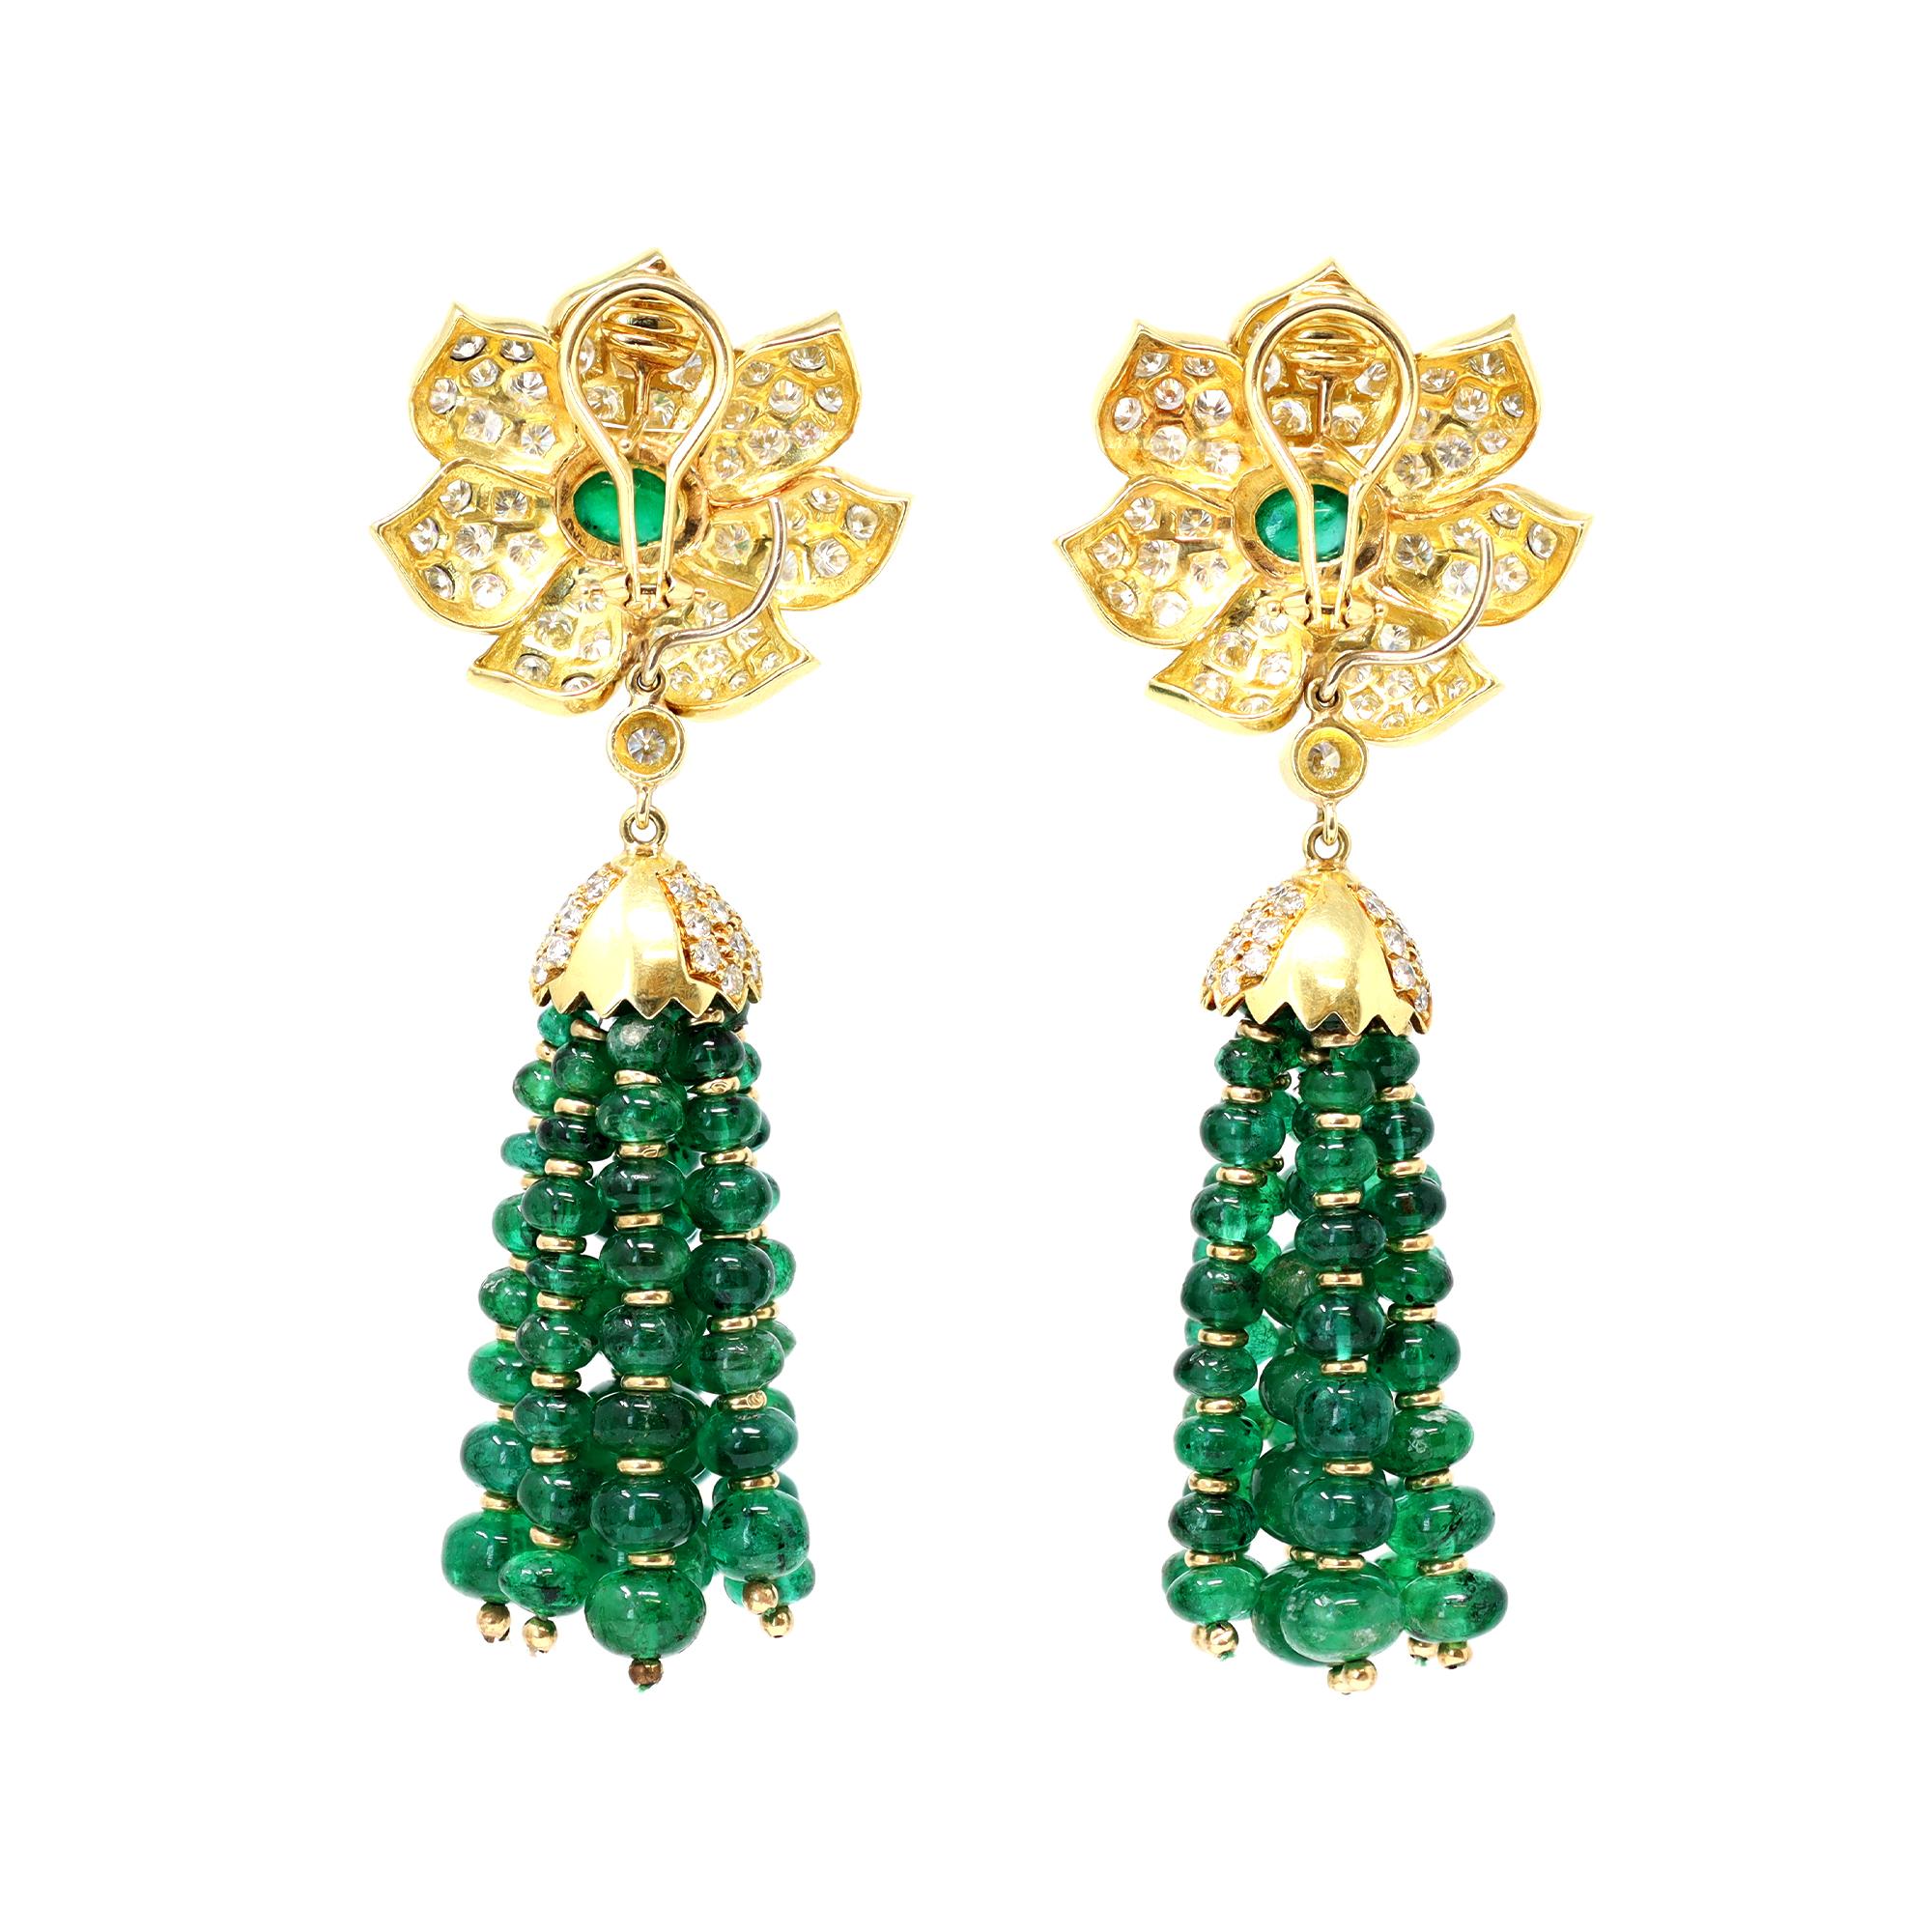 A vintage spectacular Pair of emerald bead Tassel and diamond earclips, Day and Night, set in 18 karat yellow gold. The earrings are circa 1970-80, featuring at the top a flower design with a cabochon emerald in its center and diamonds set in a